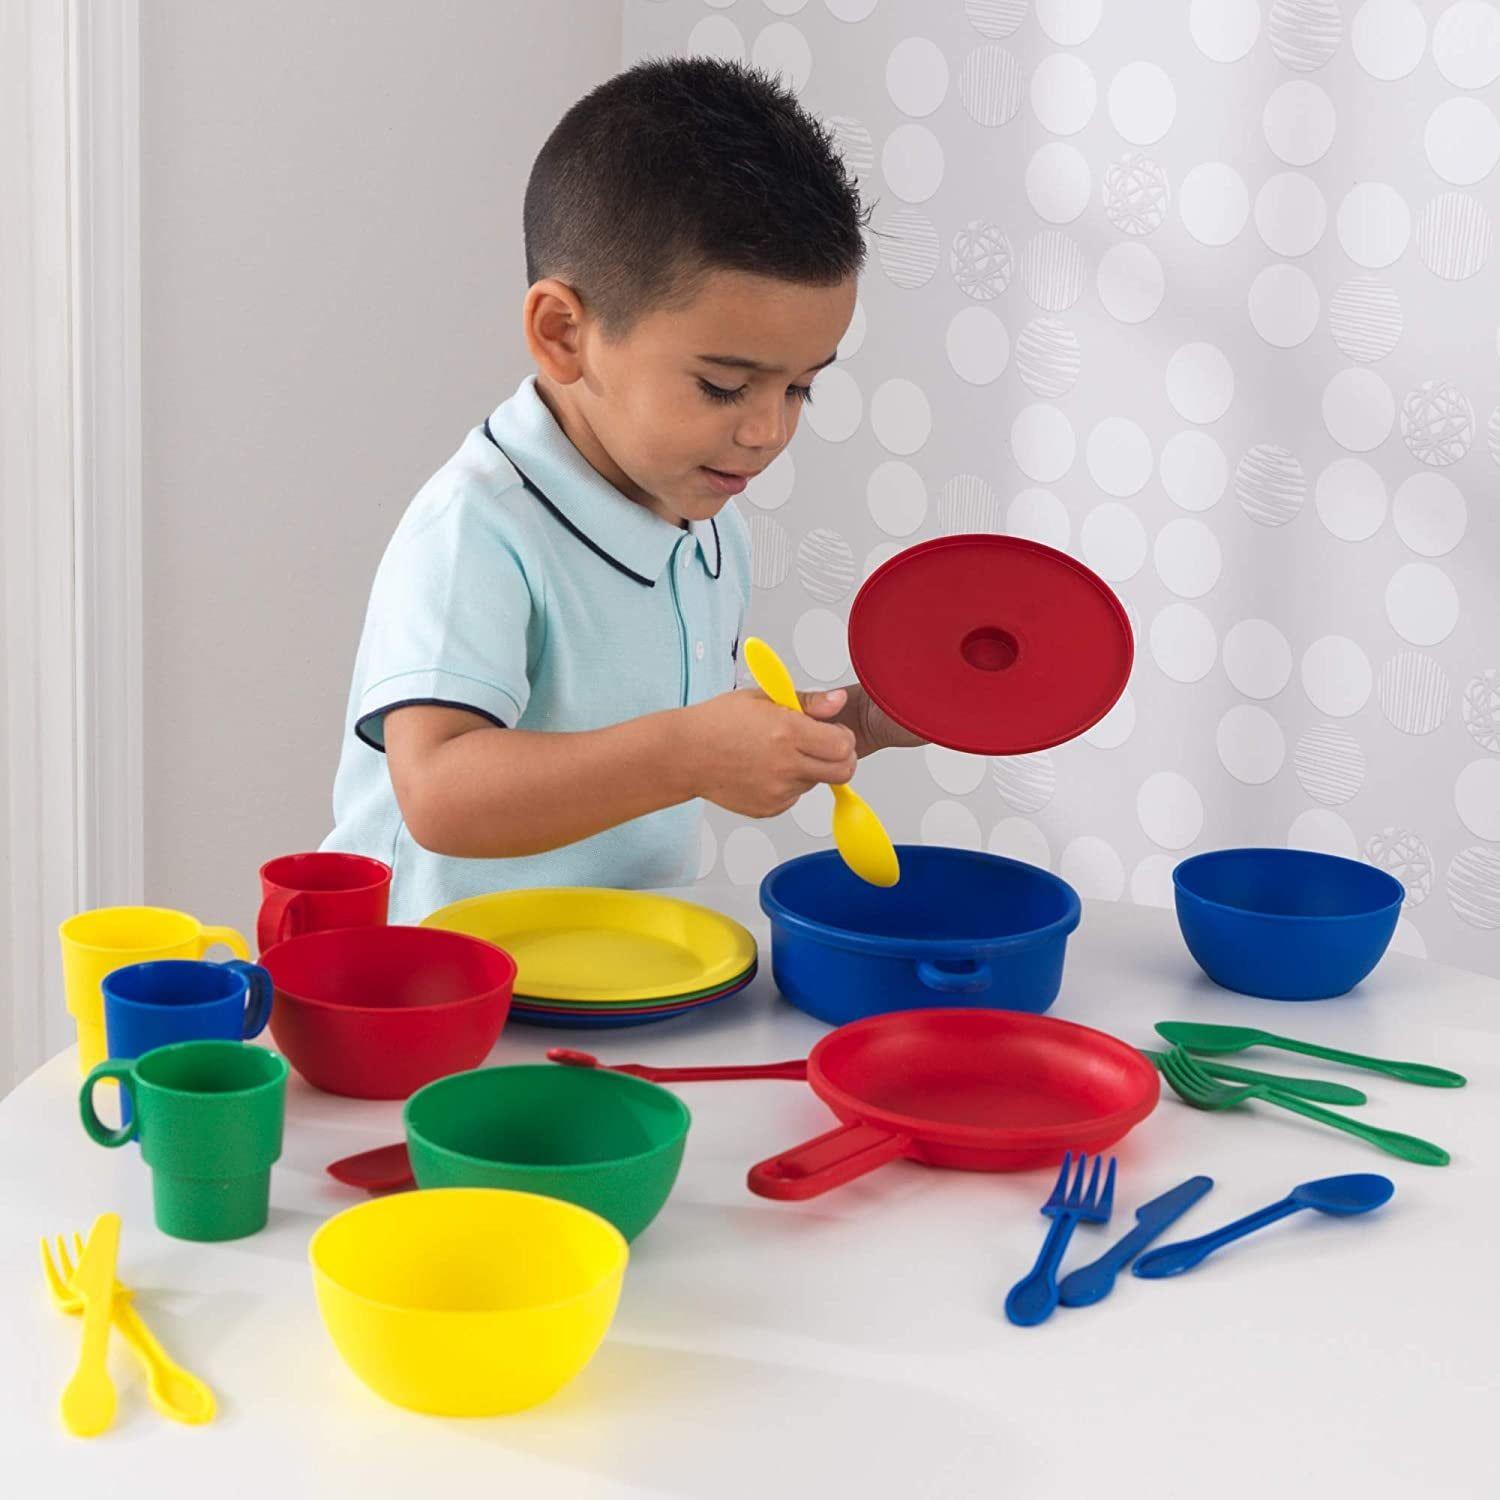 27-Piece Primary Colored Cookware Set, Plastic Dishes and Utensils for Play Kitchens, Gift for Ages 18 Mo+